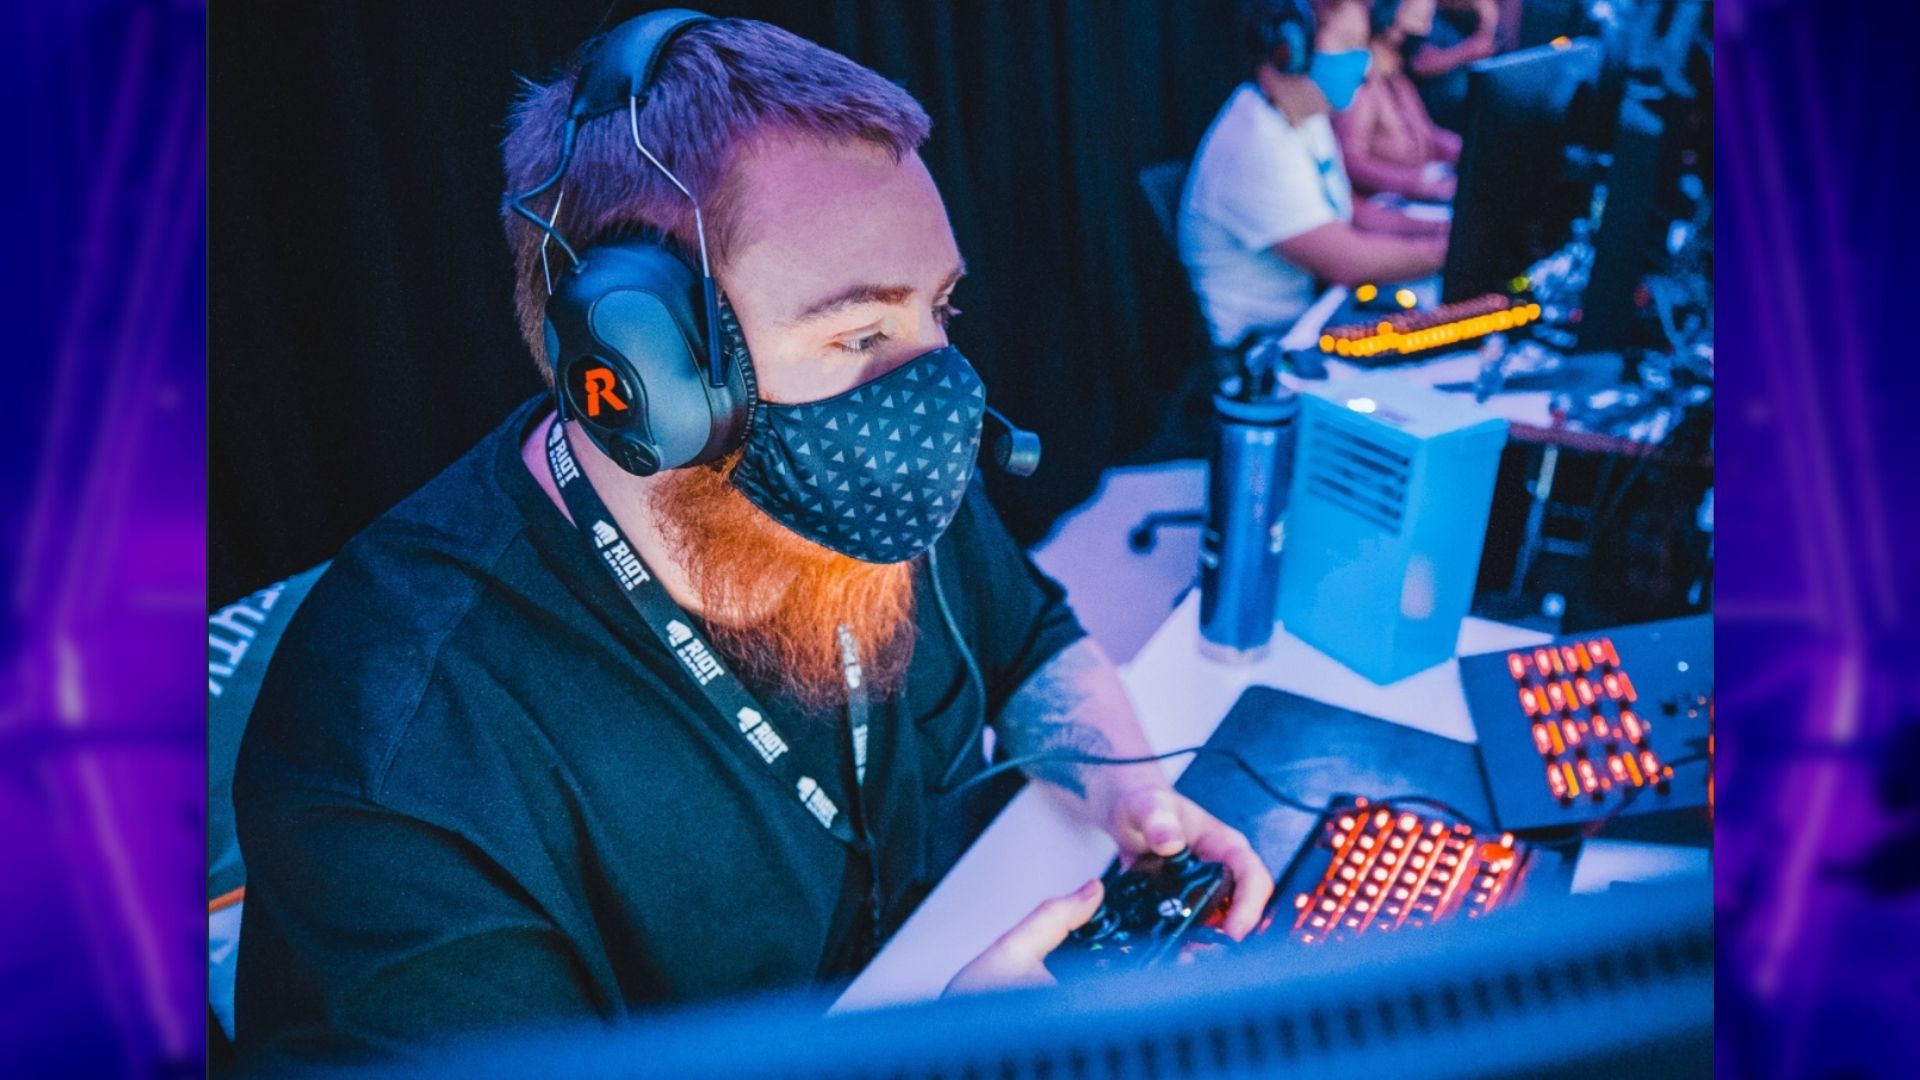 In-game observers are the greatest unsung heroes in esports